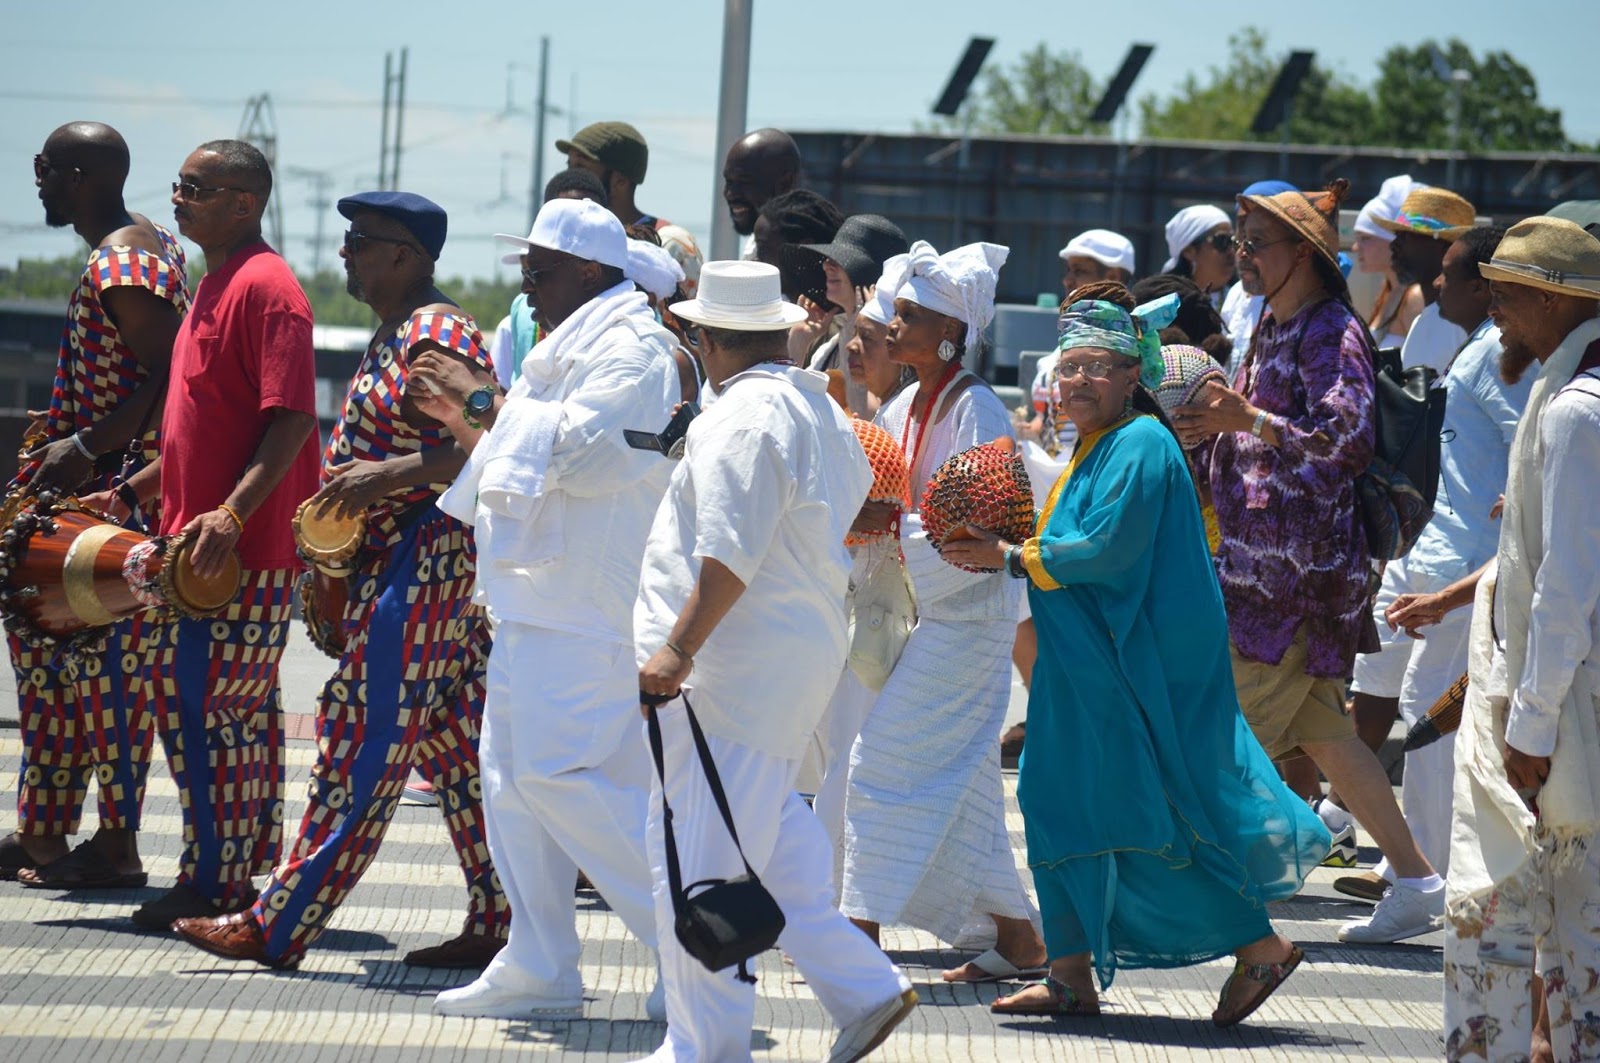 Odunde Yoruba New Year Festival In U.S With Ooni Photos And Videos